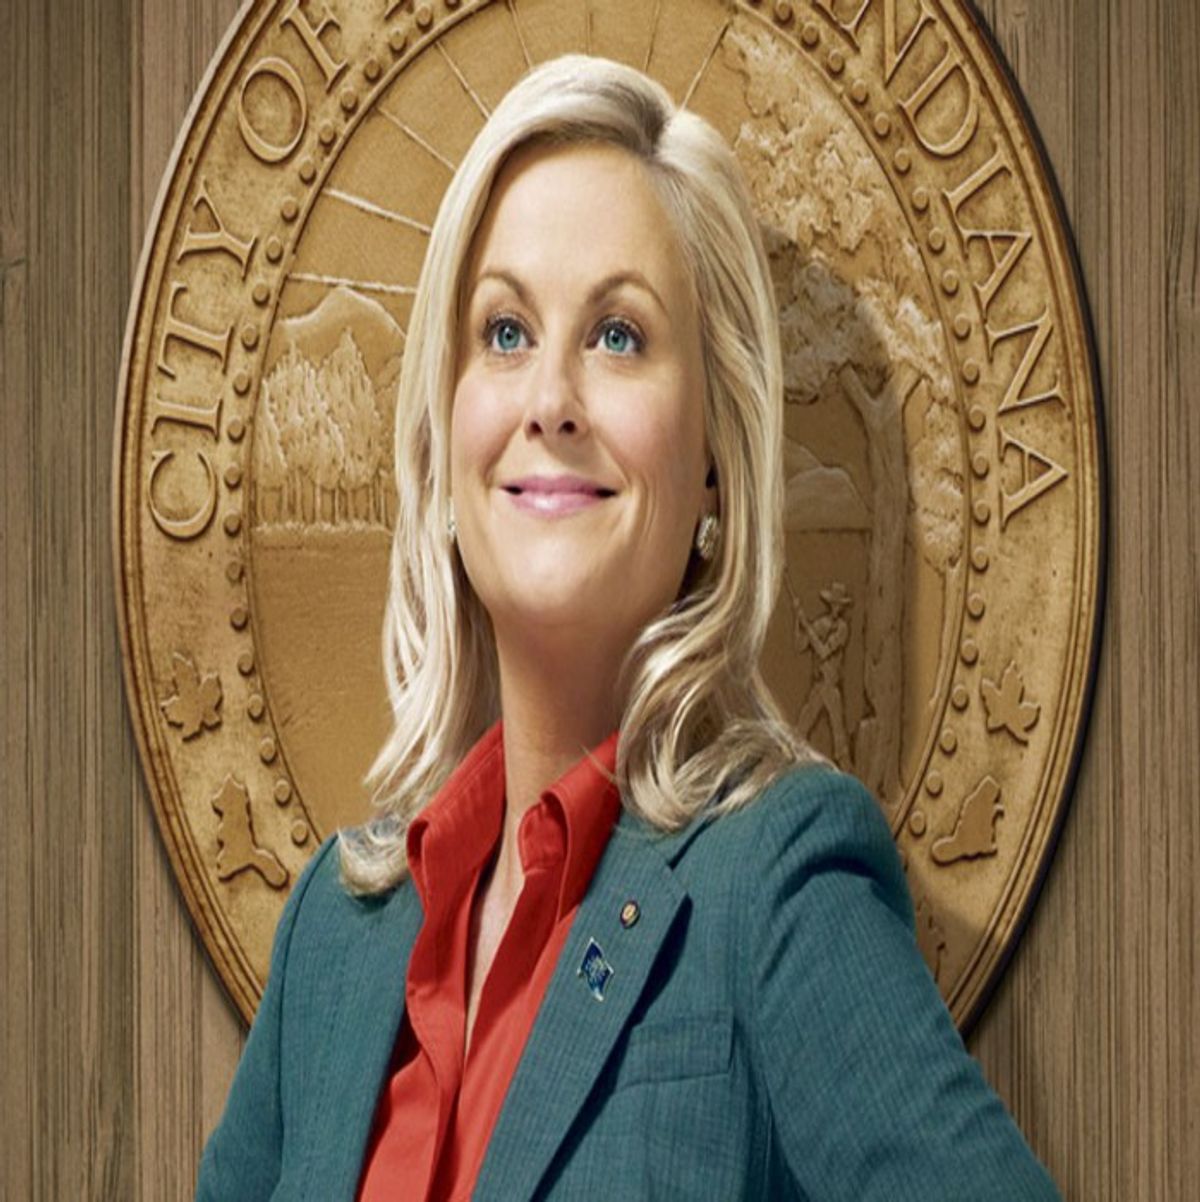 10 Things We Can All Learn From Leslie Knope